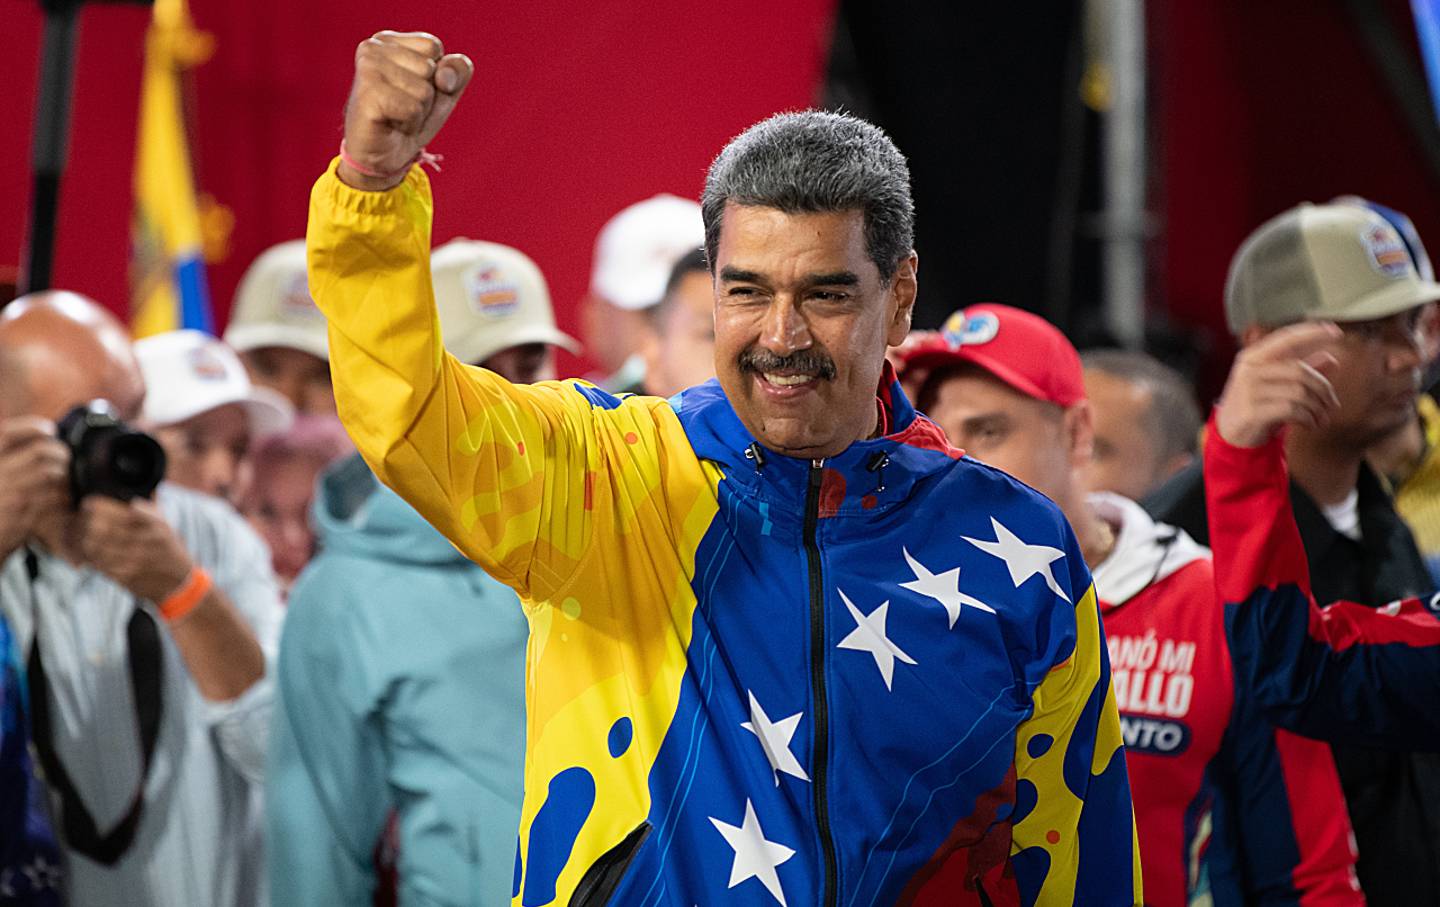 Venezuelan President Nicolas Maduro celebrates after claiming victory in the presidential election on at Miraflores Palace July 28, 2024, in Caracas. But the opposition leaders—and many observers—dispute his claim.